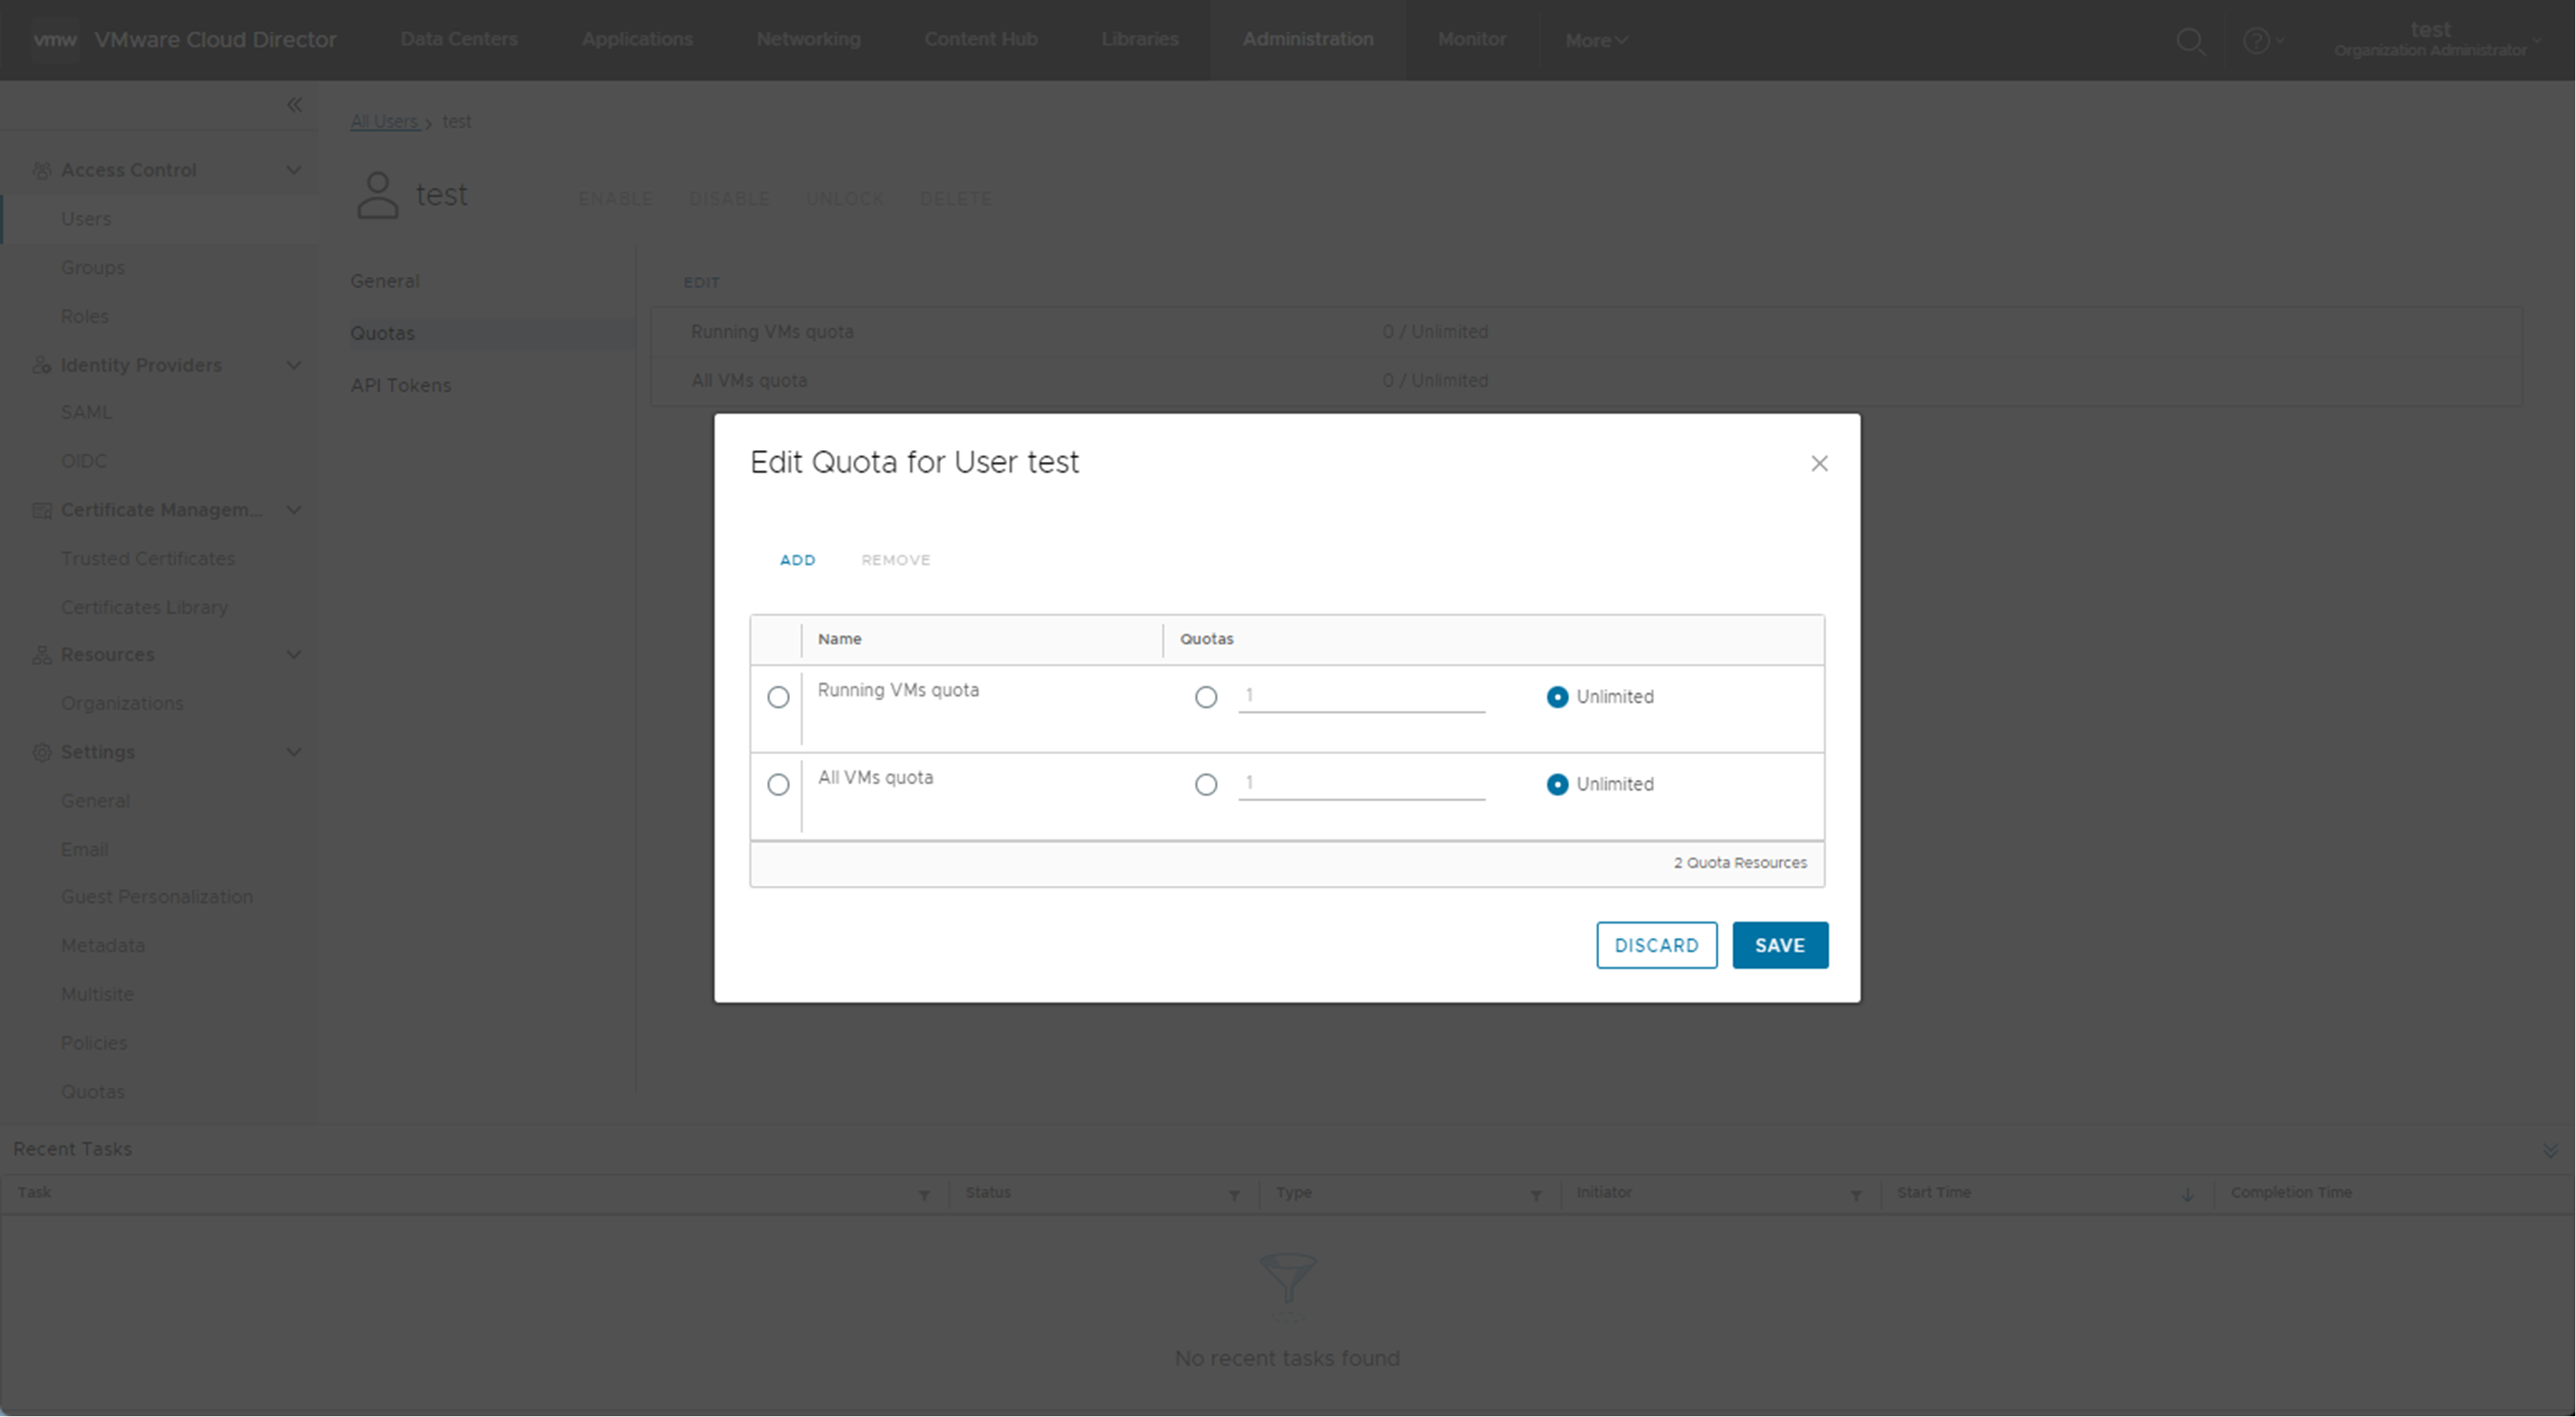 You can add or edit resource quotas for specific VMware Cloud Director users.